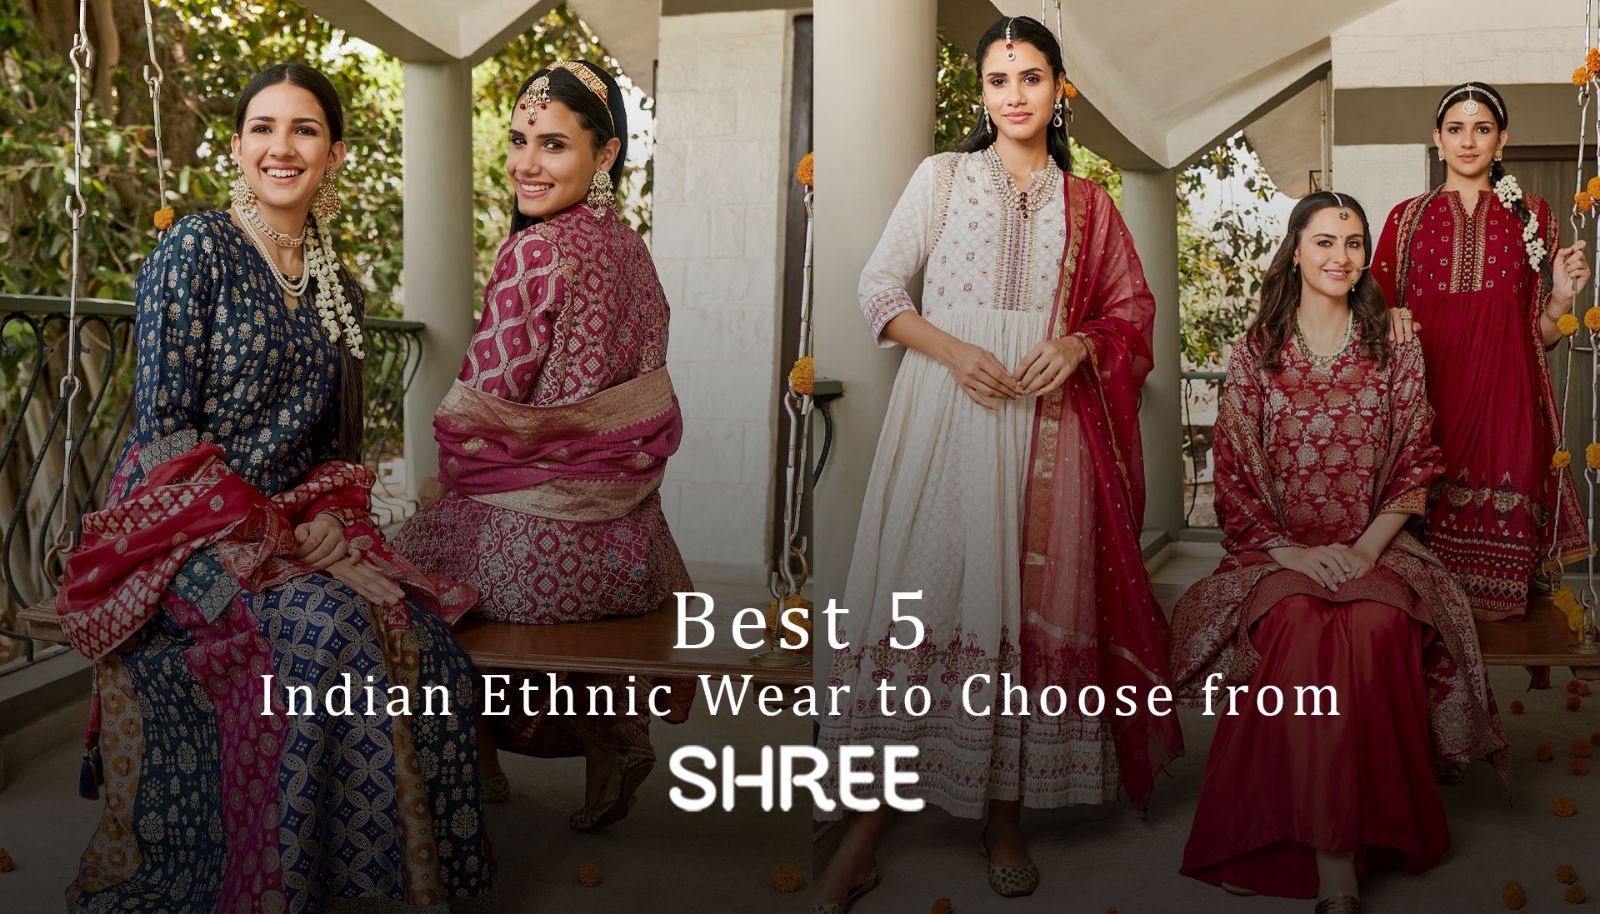 Best 5 Indian Ethnic Wear to Choose from Shree